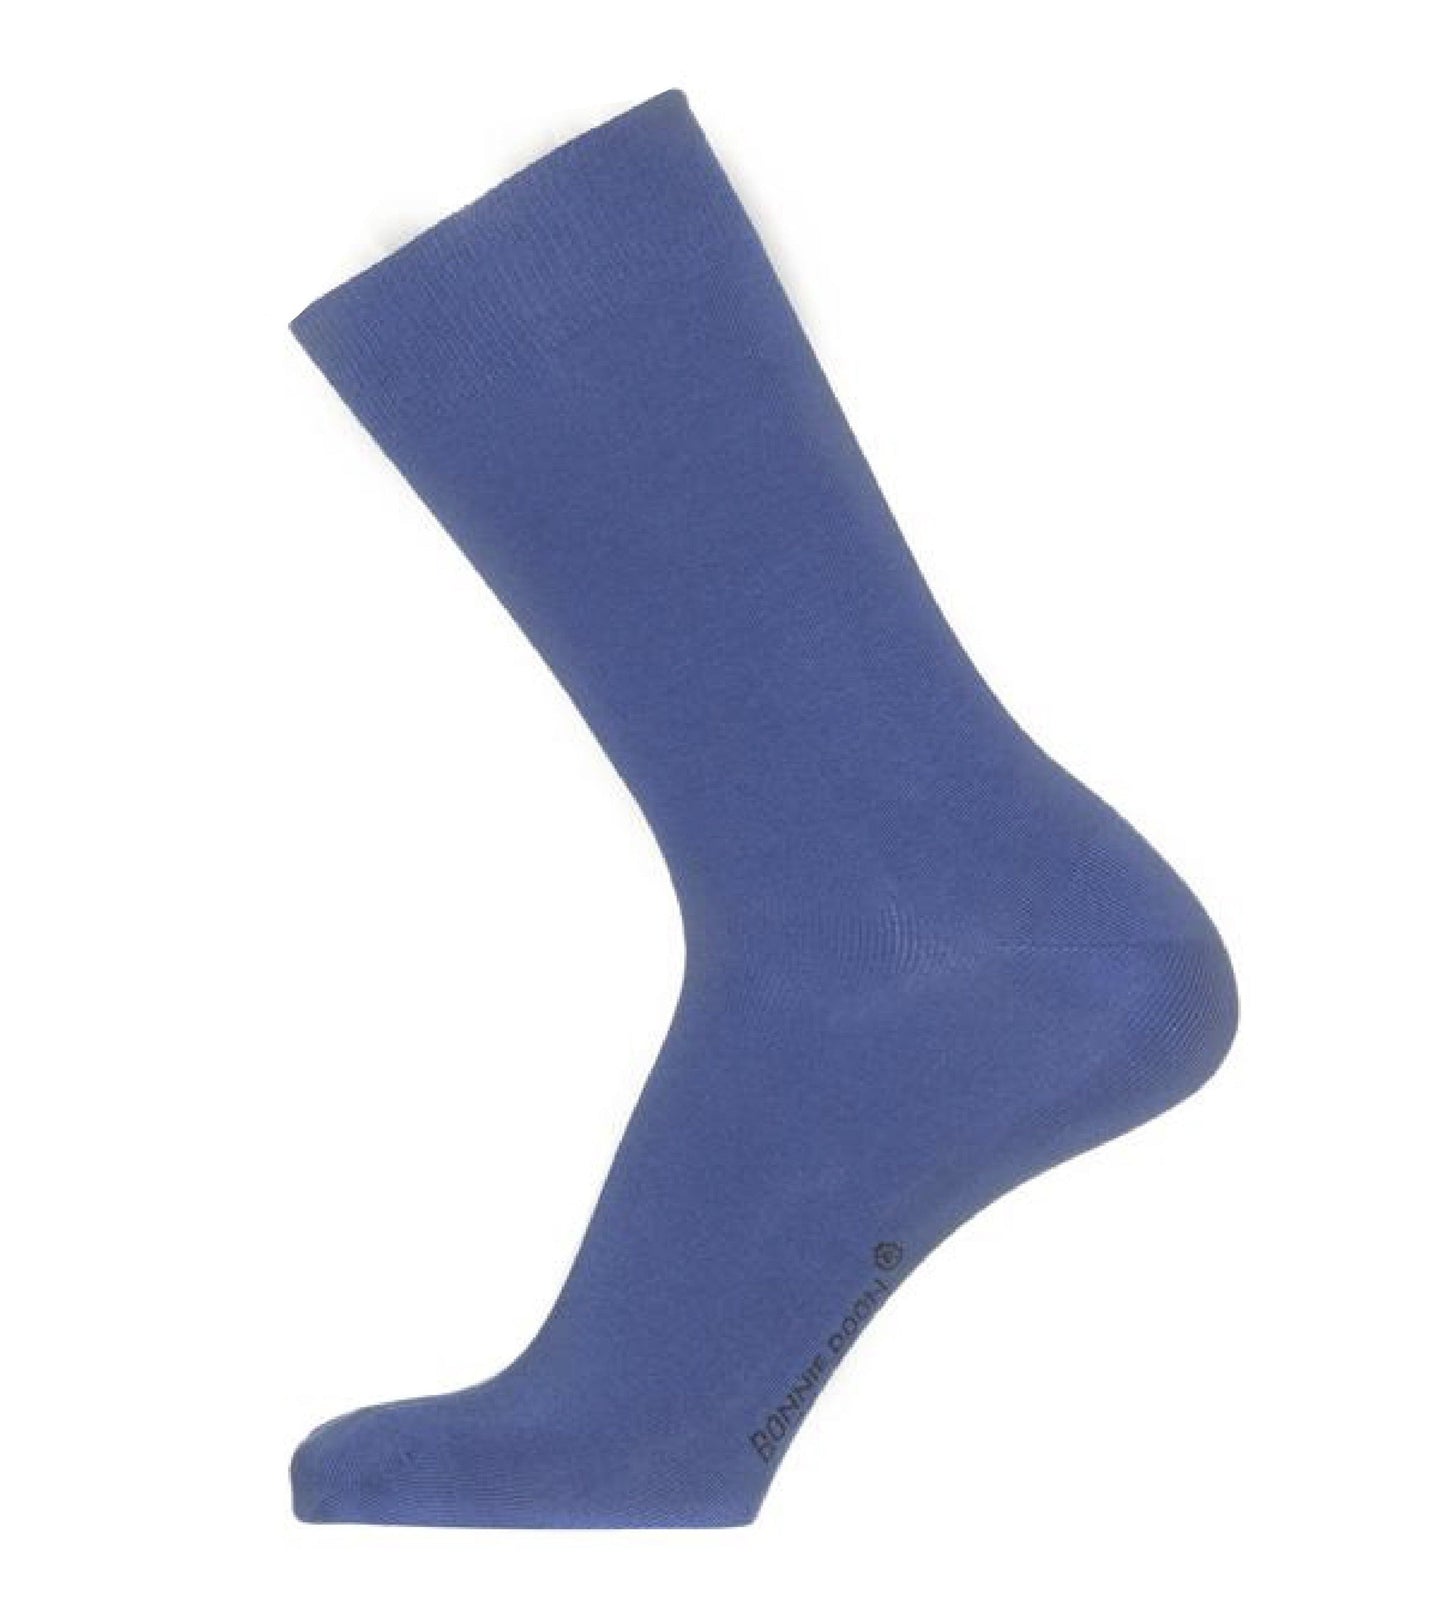 Bonnie Doon 83422 / BD632401 Cotton Sock - blue ankle socks available in men and women sizes